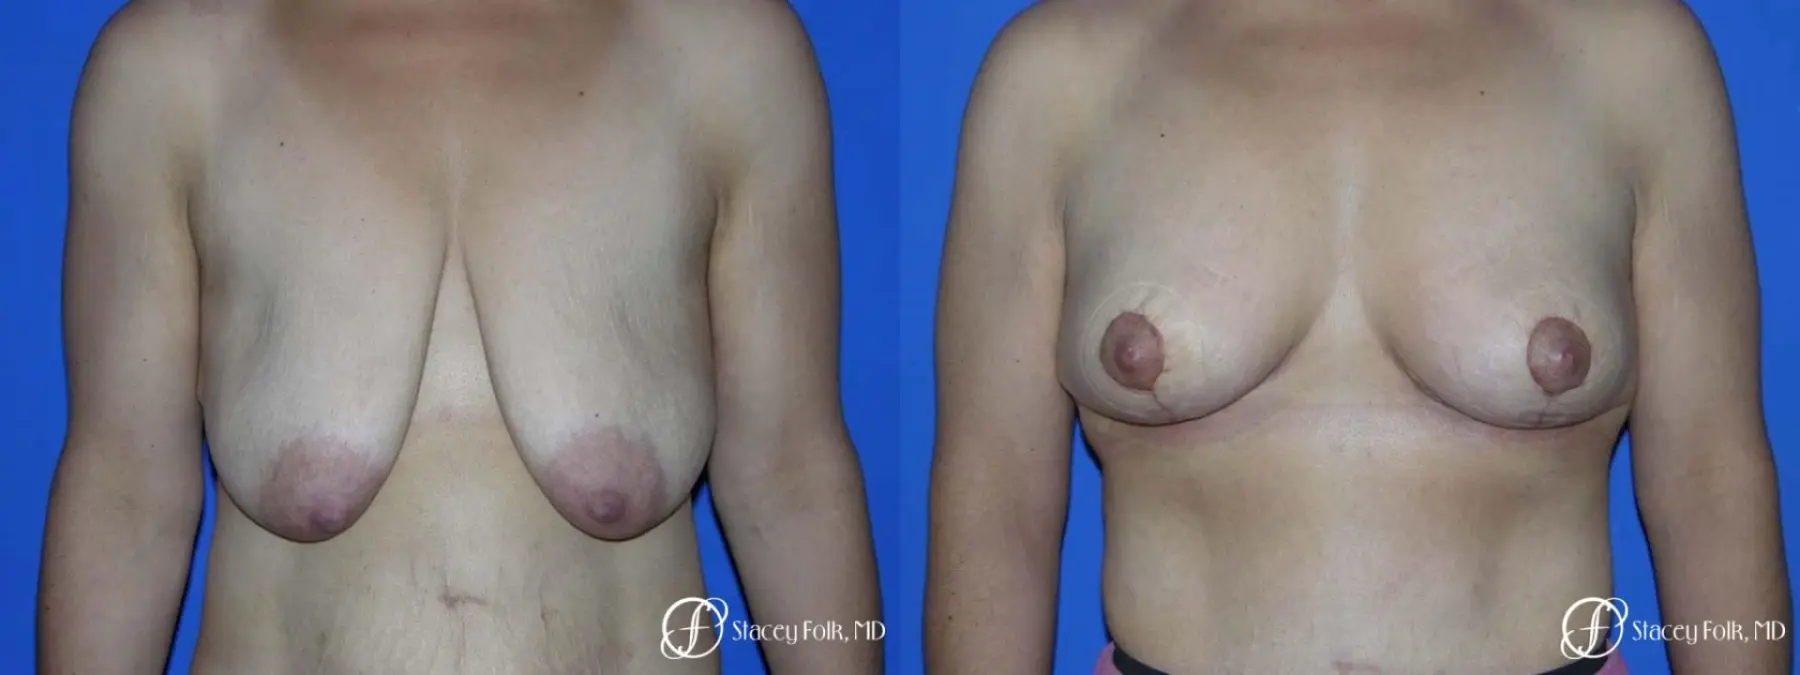 Denver Breast Lift - Mastopexy 7982 - Before and After